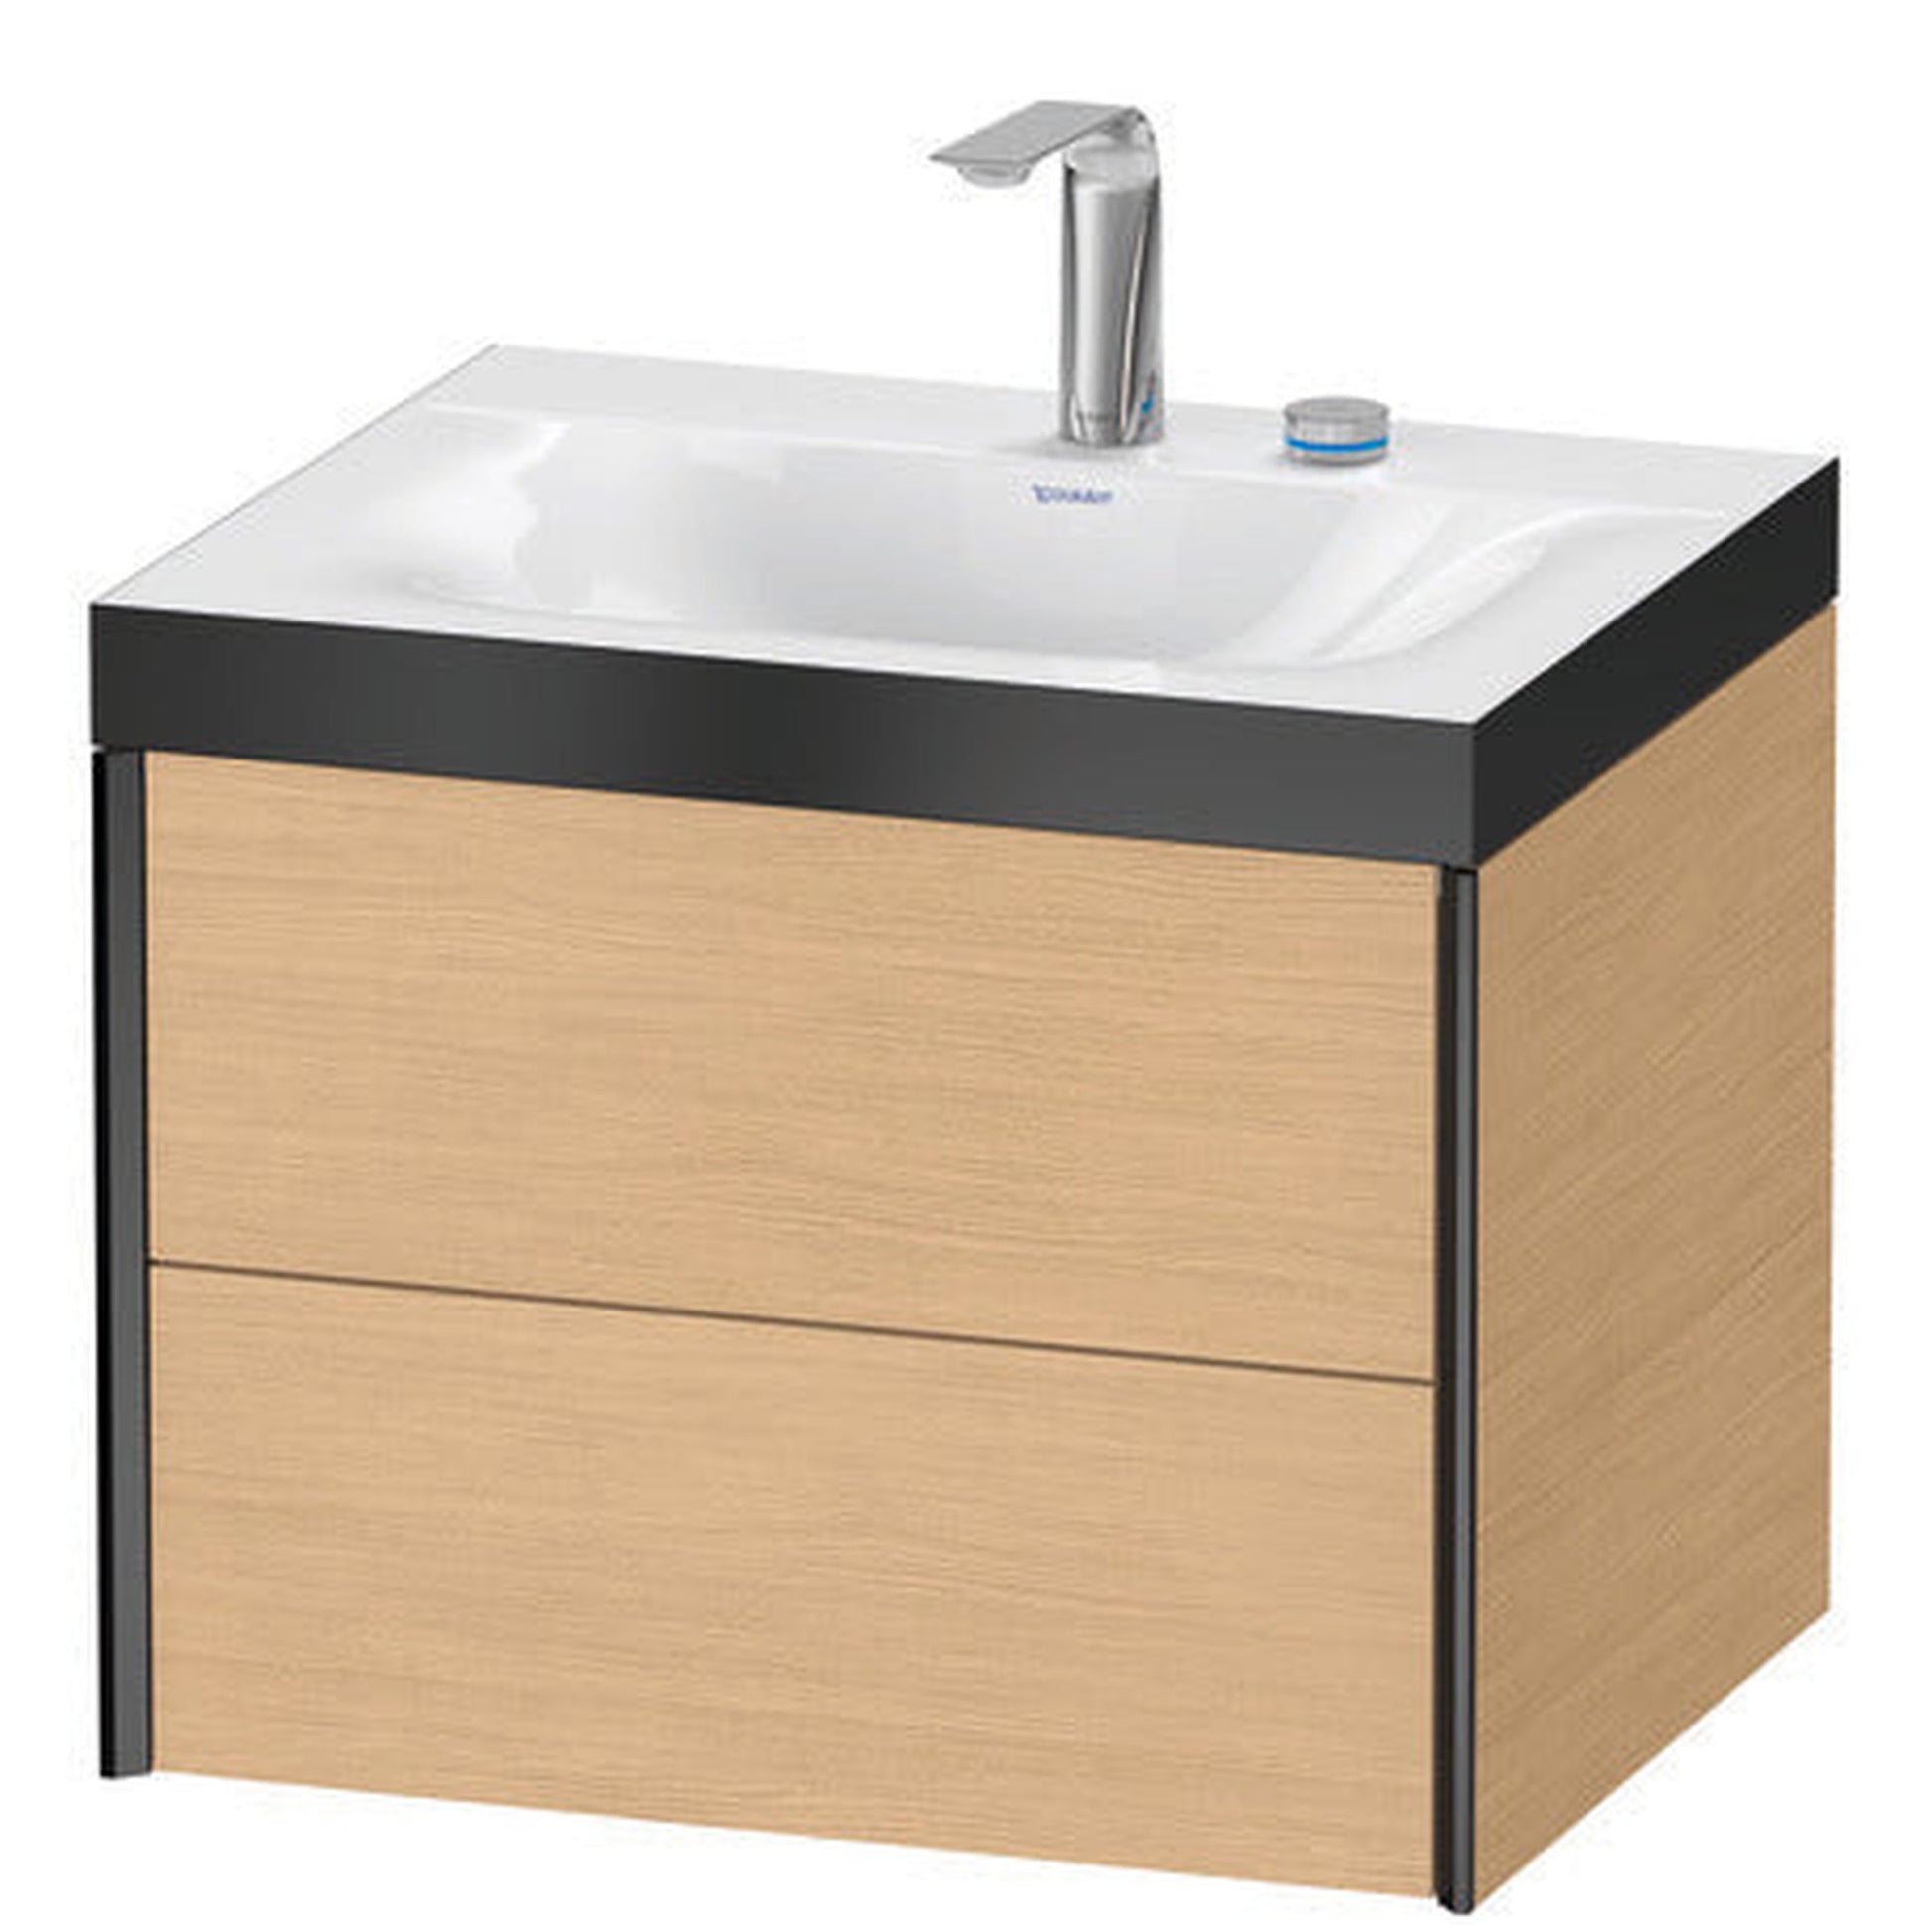 Duravit Xviu 24" x 20" x 19" Two Drawer C-Bonded Wall-Mount Vanity Kit With Two Tap Holes, Natural Oak (XV4614EB230P)